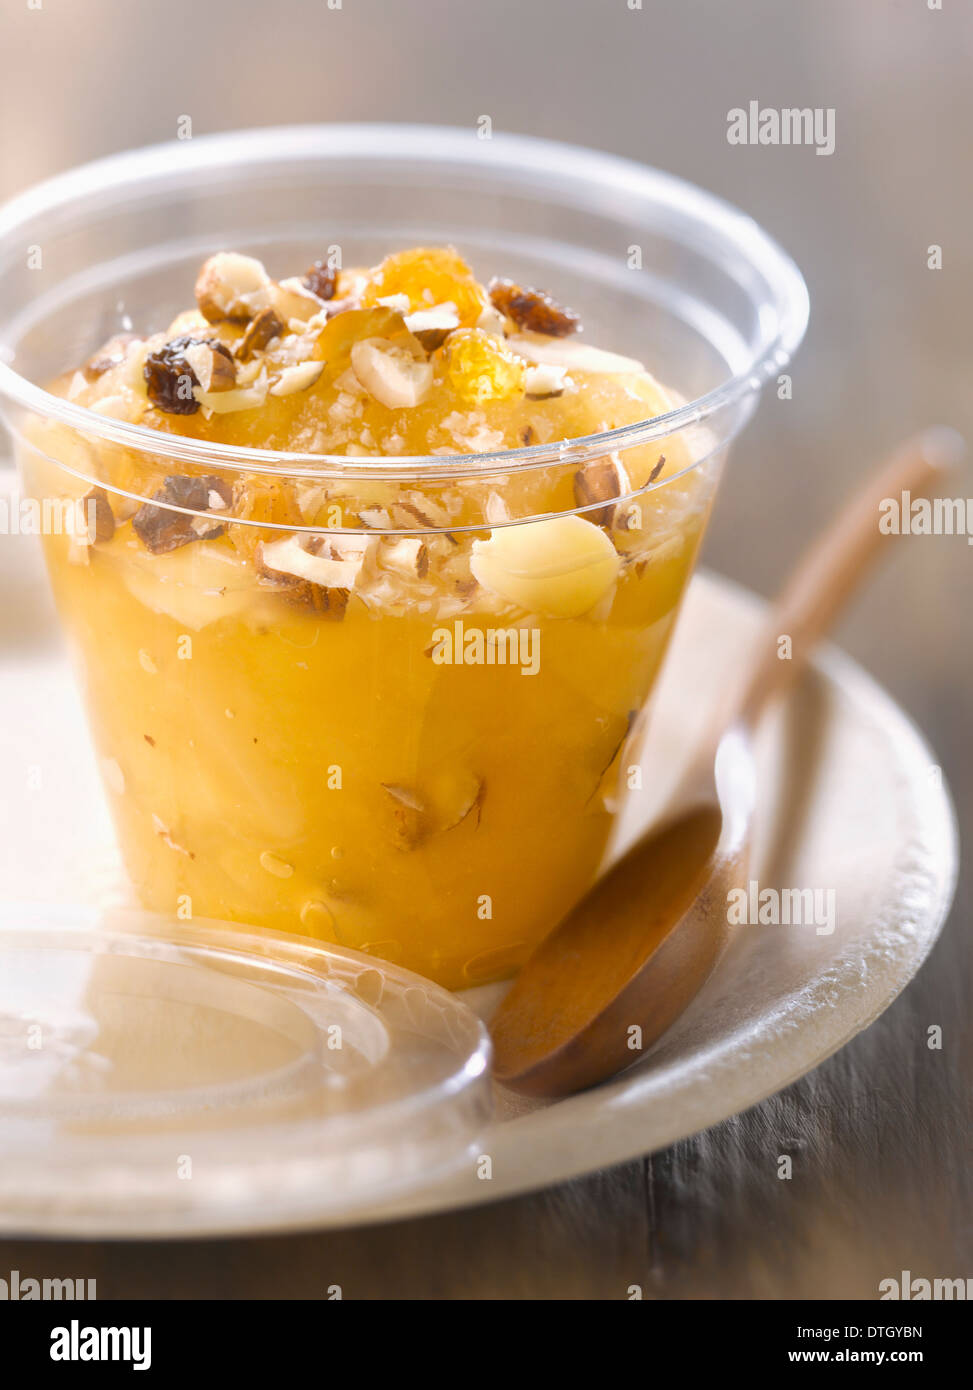 Stewed pears and apples with dried fruit Stock Photo